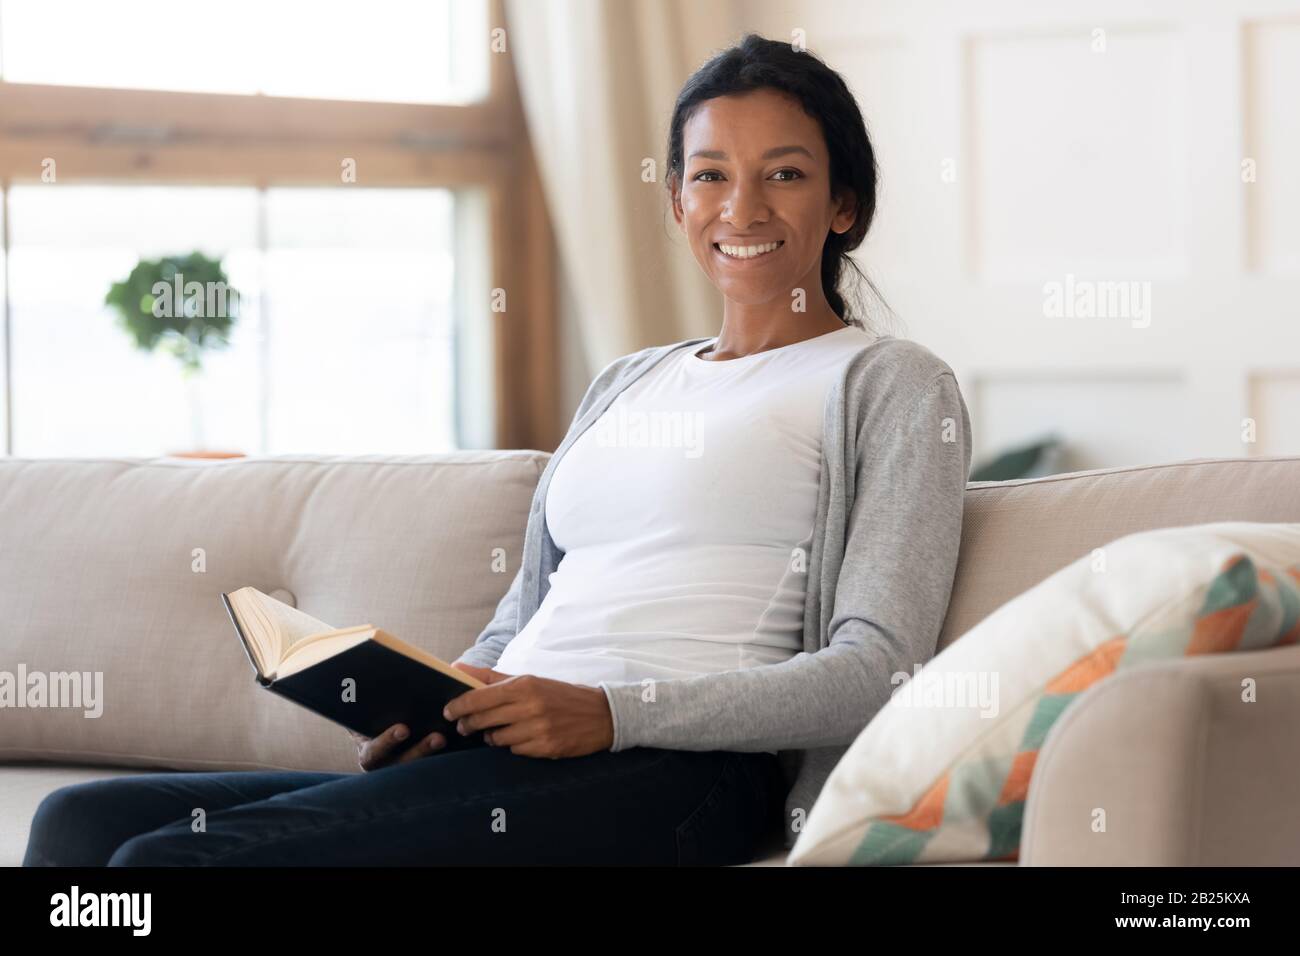 Portrait of smiling biracial woman relax on couch with book Stock Photo